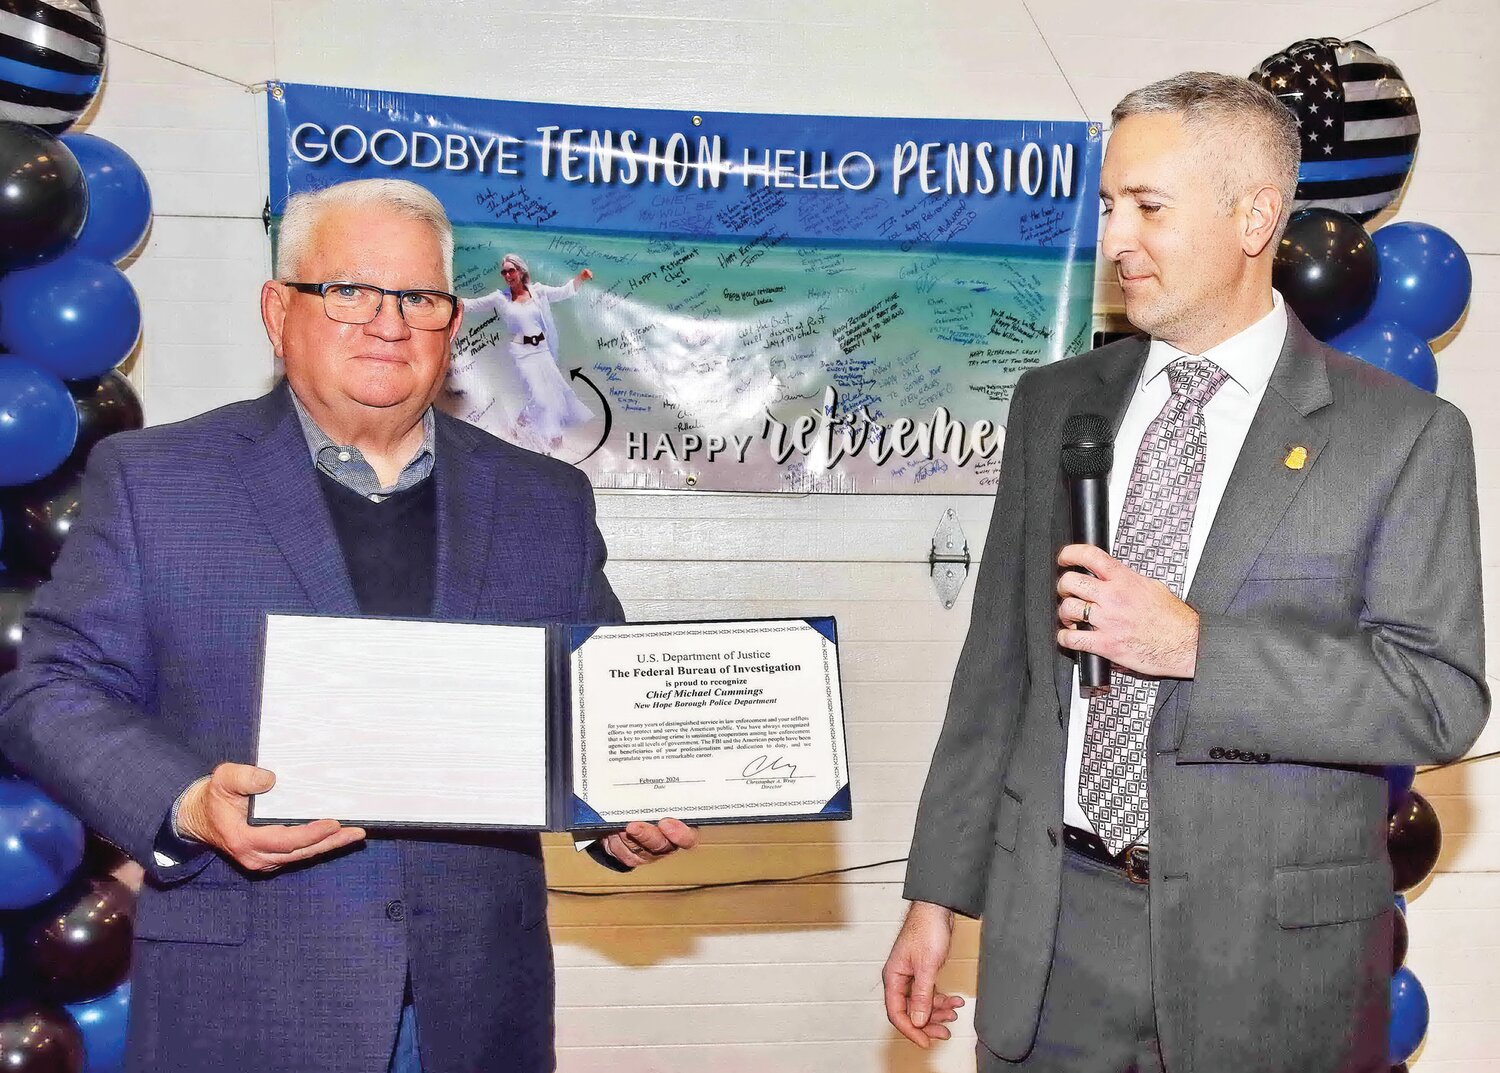 Standing in front of a sign that reads “Goodbye tension, hello pension,” New Hope Police Chief Michael Cummings accepts a commendation from the FBI at a retirement dinner Jan. 27  at the New Hope Eagle Fire Co.